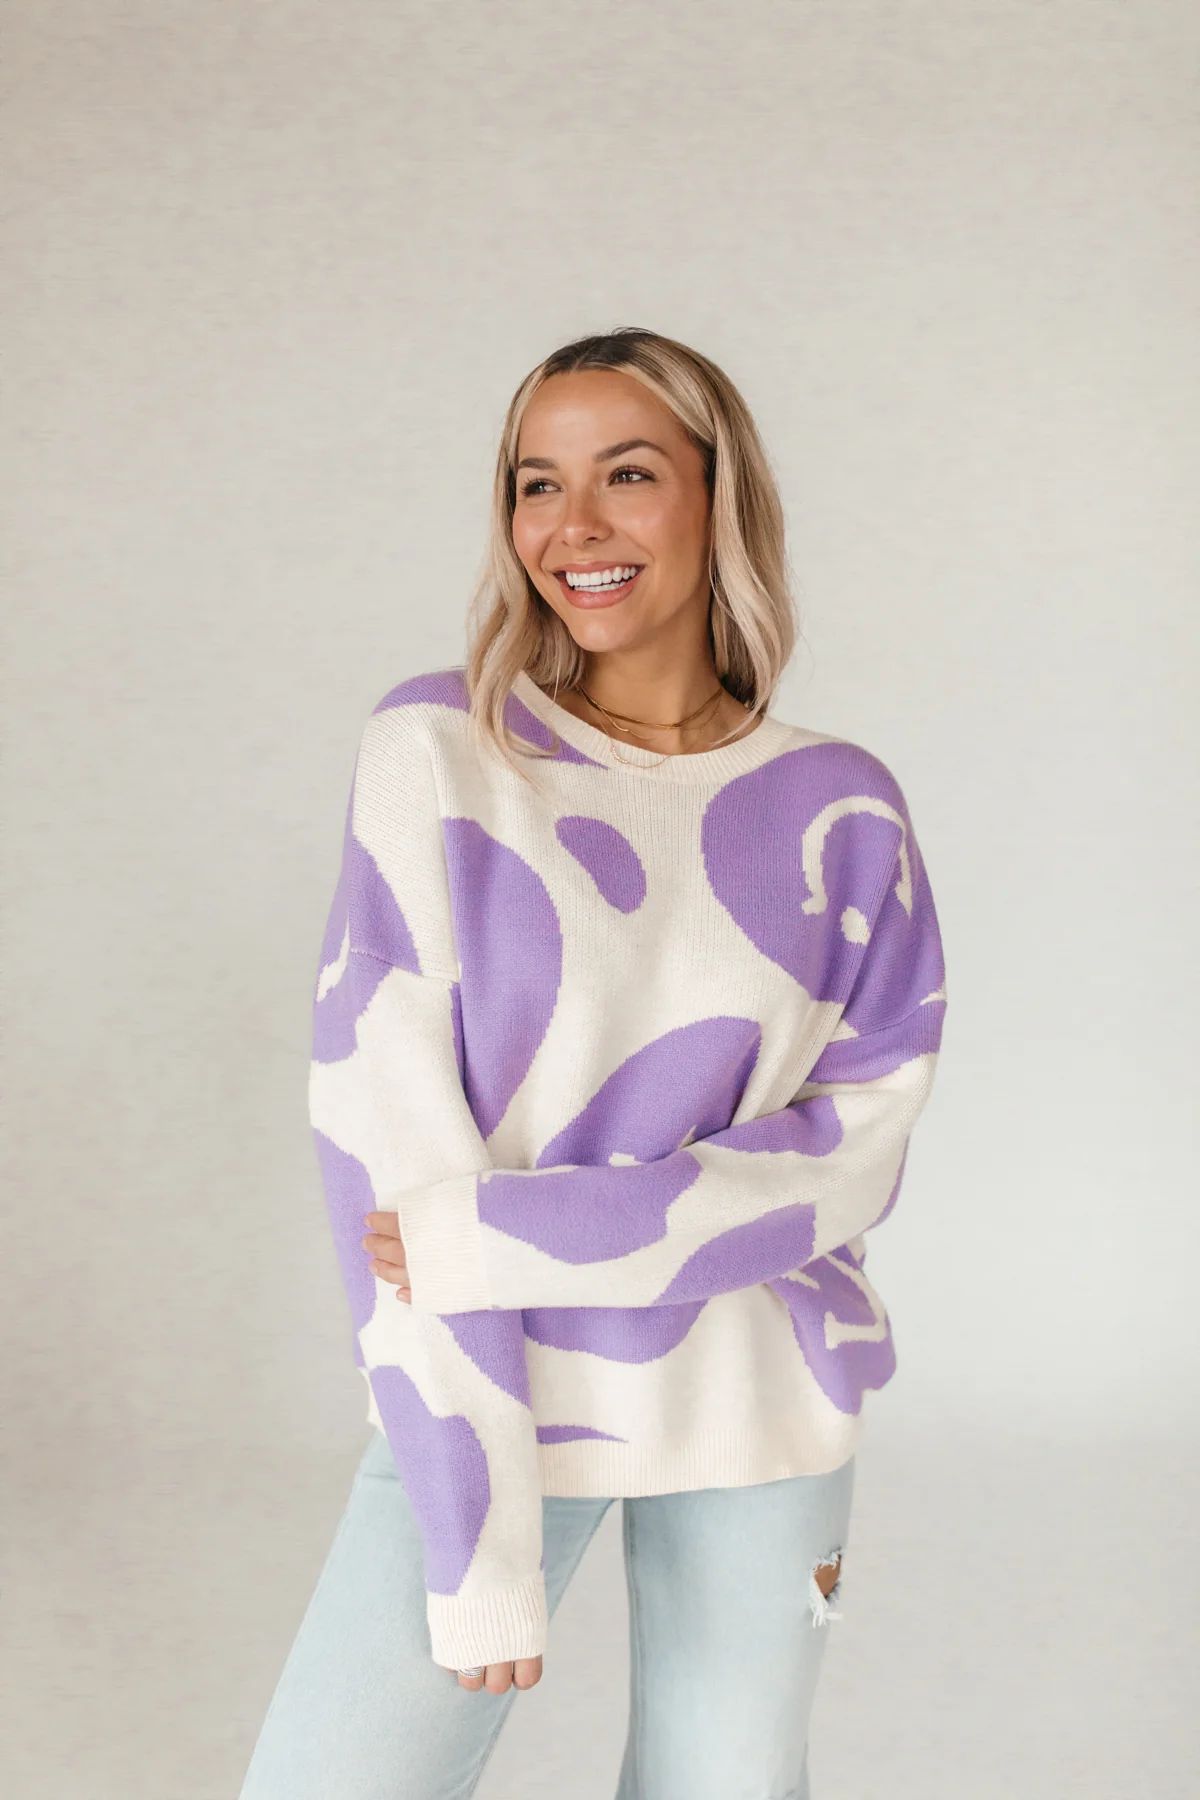 RESTOCK - All Smiles Lilac Sweater | The Post